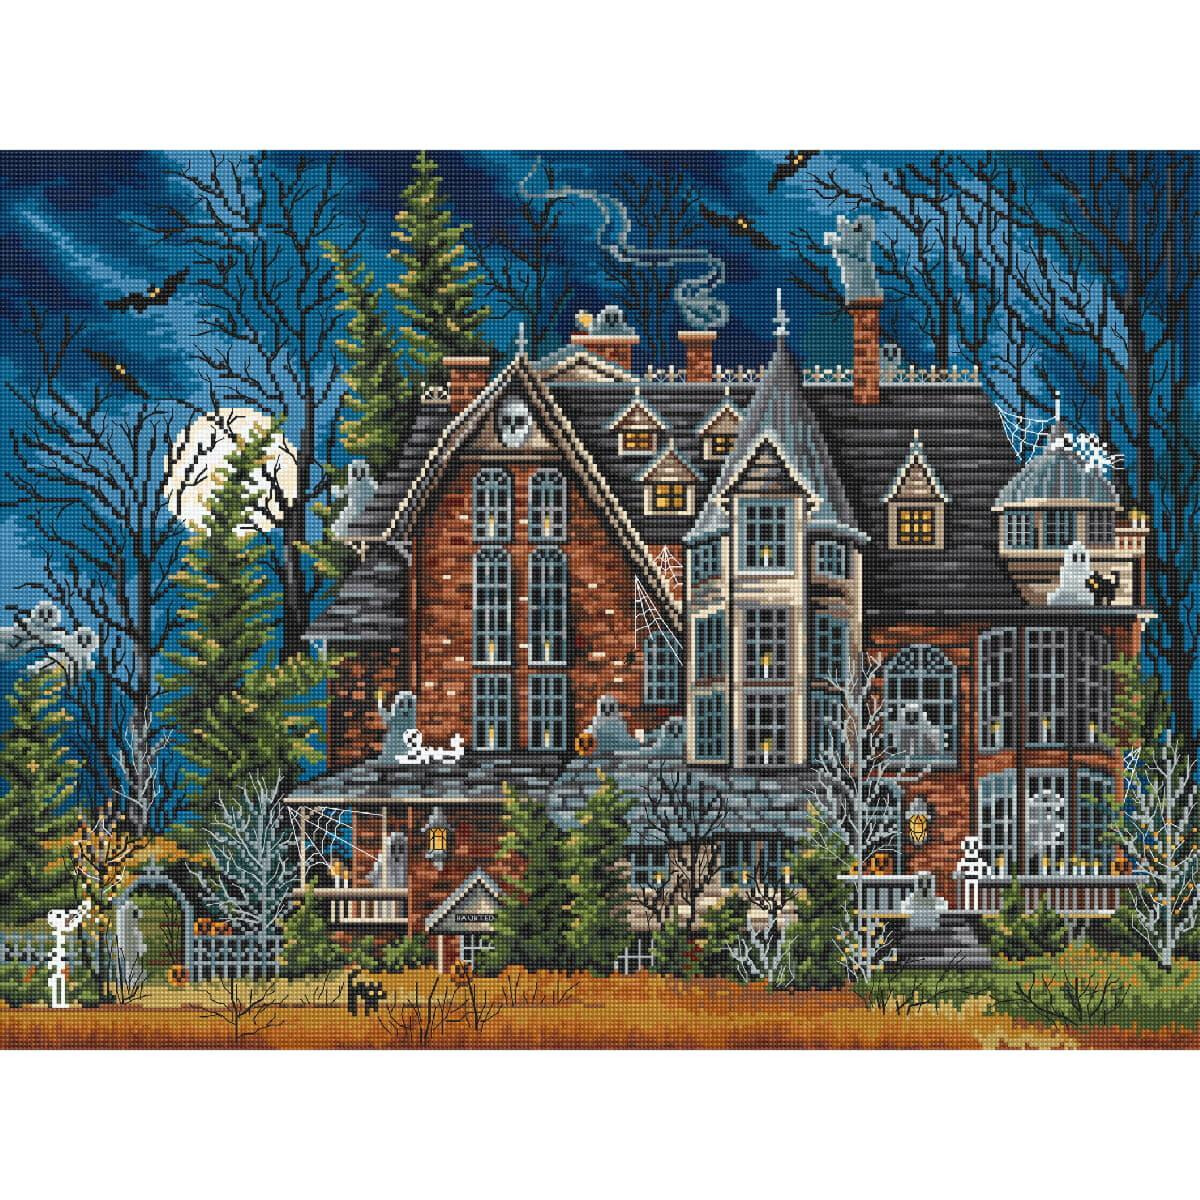 A detailed Letistitch stick pack depiction of a haunted...